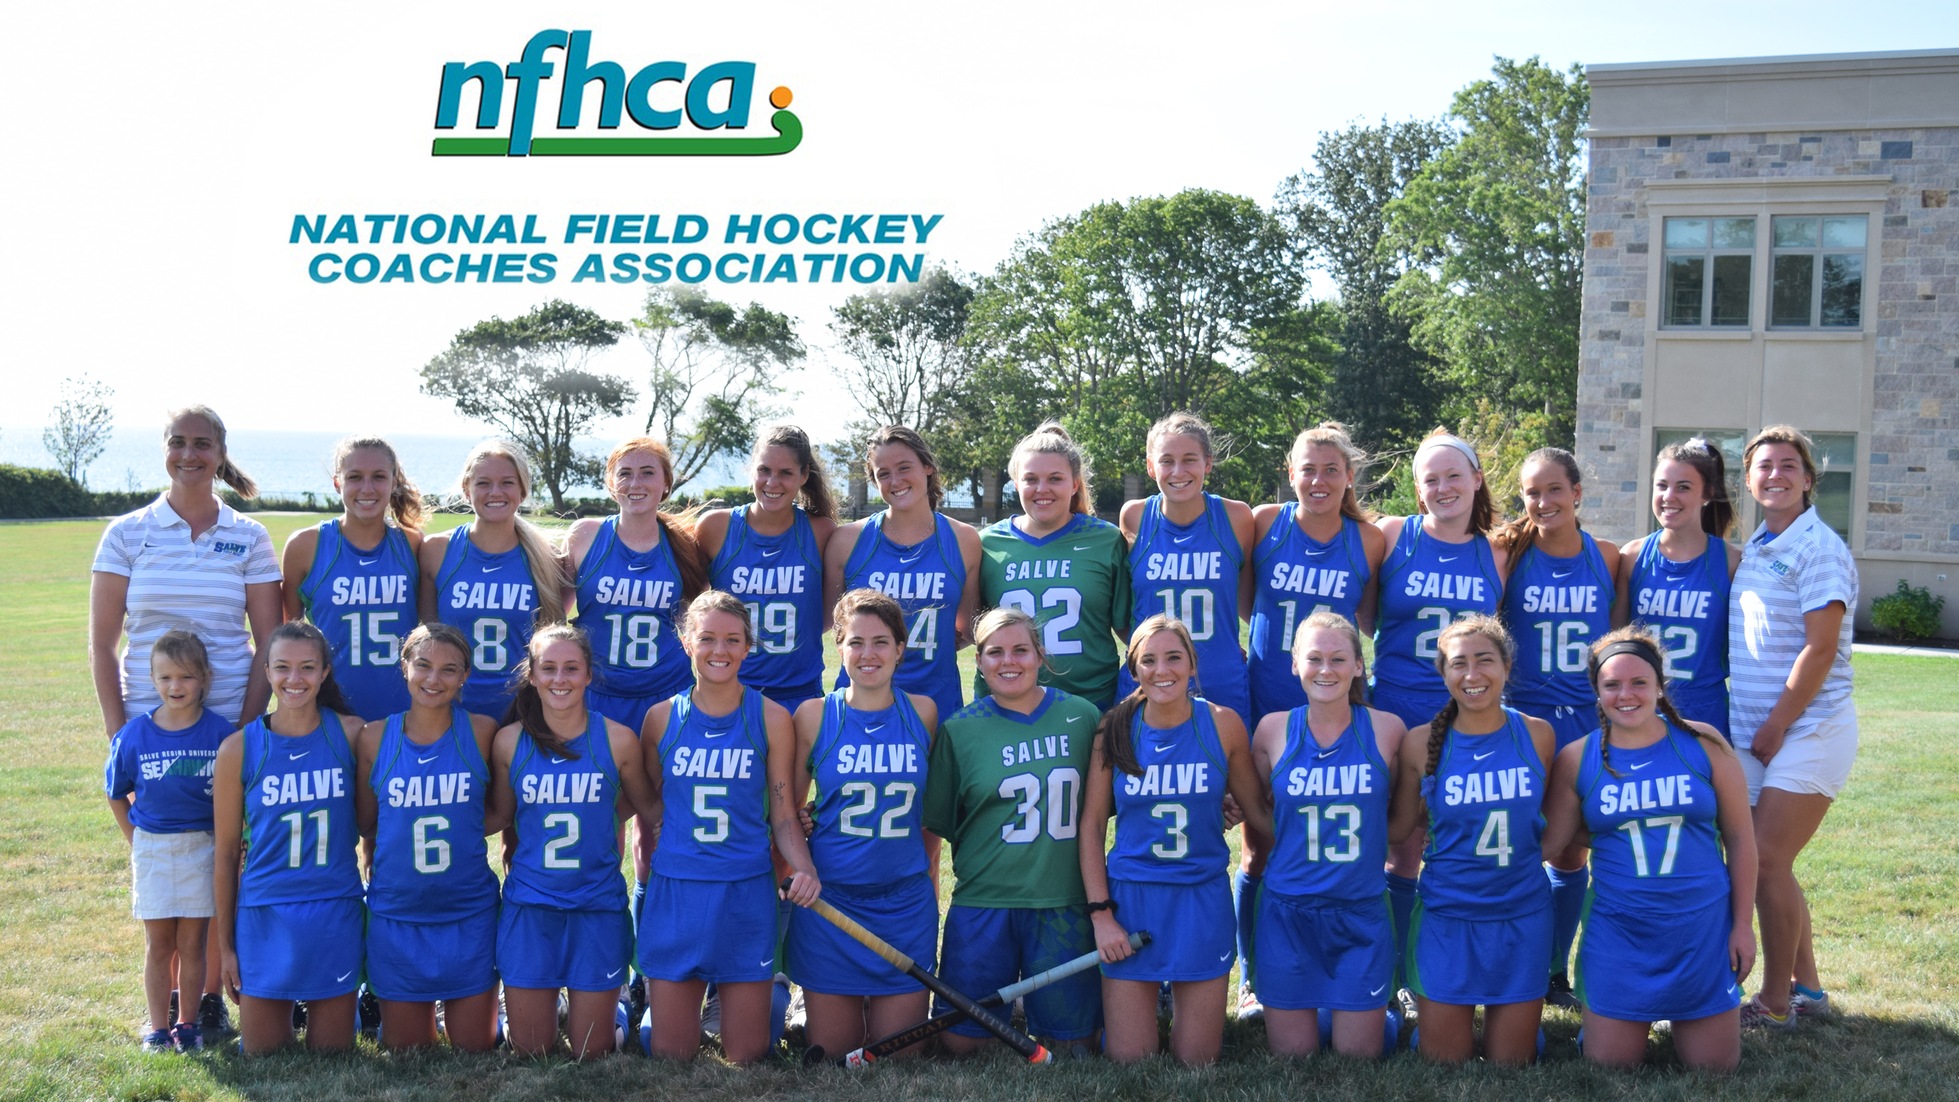 12th straight year for Salve Regina University field hockey earning academic recognition from the NFHCA.